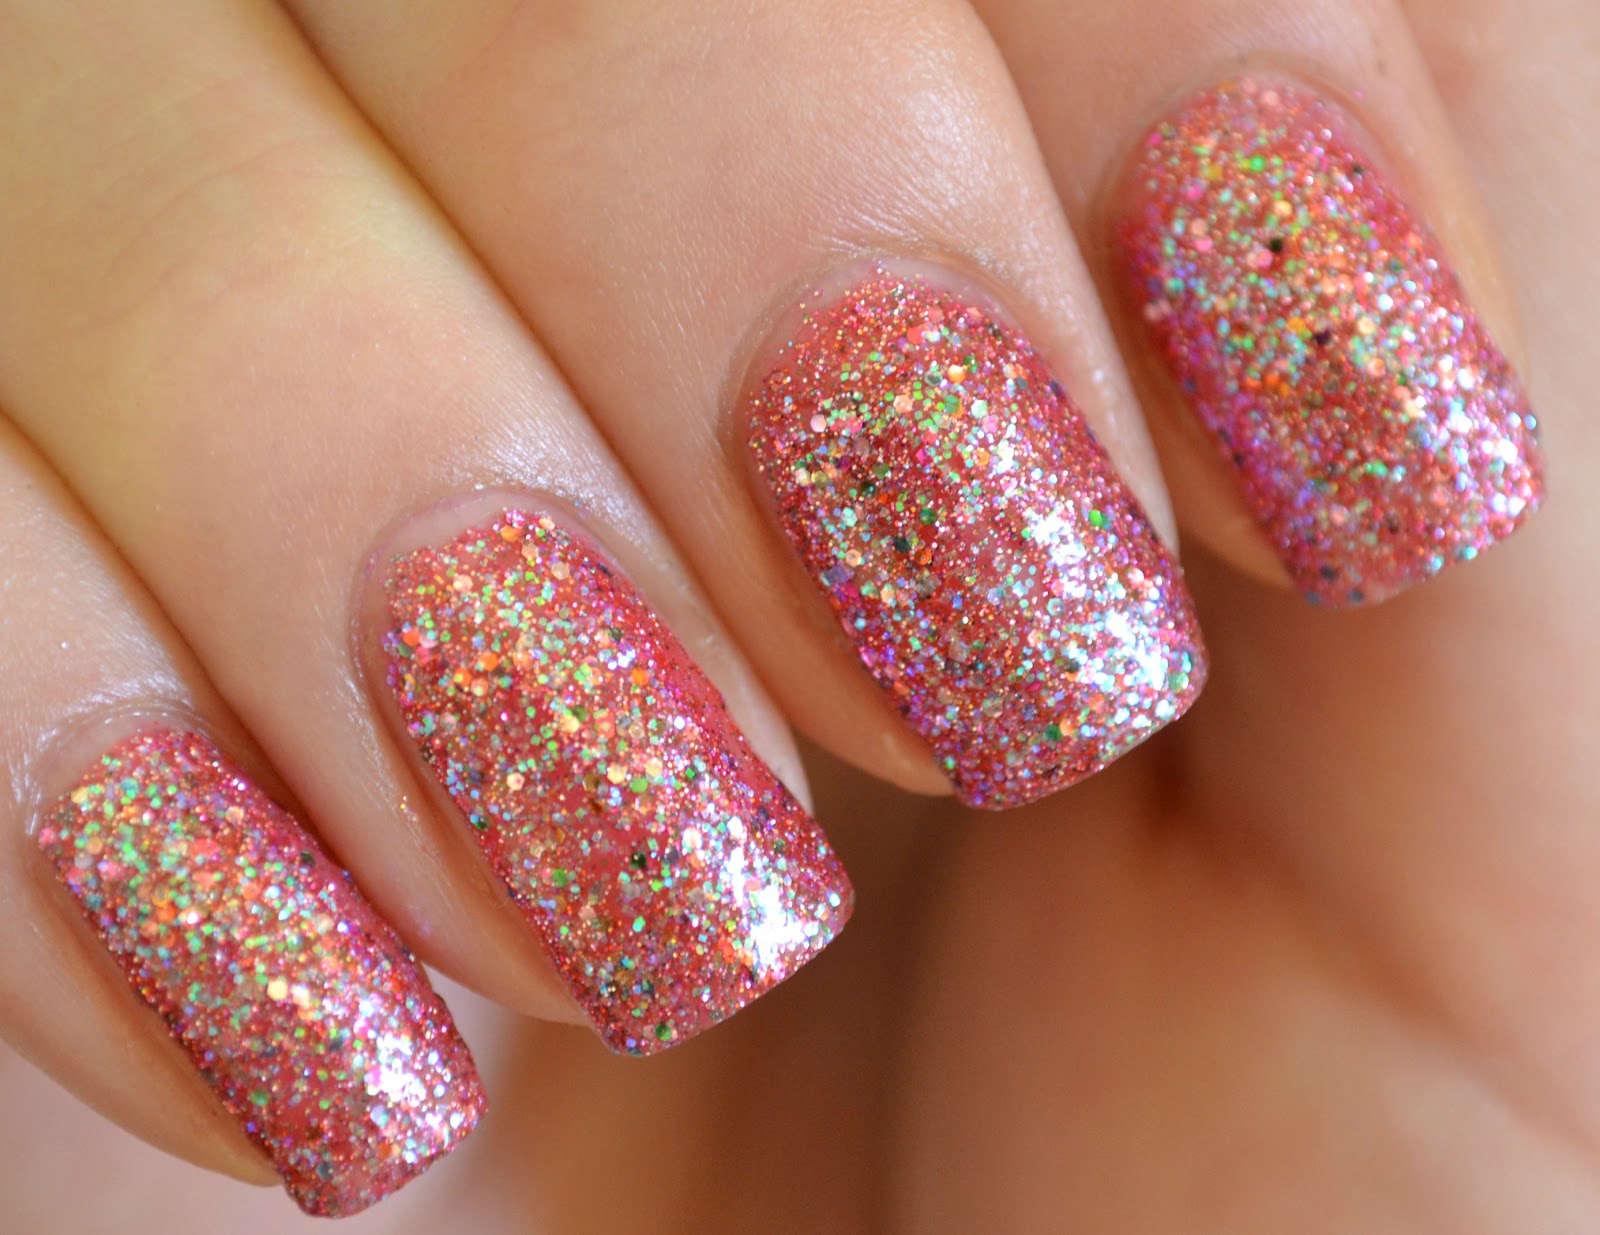 6. Glitter Blend Acrylic Nails - wide 1